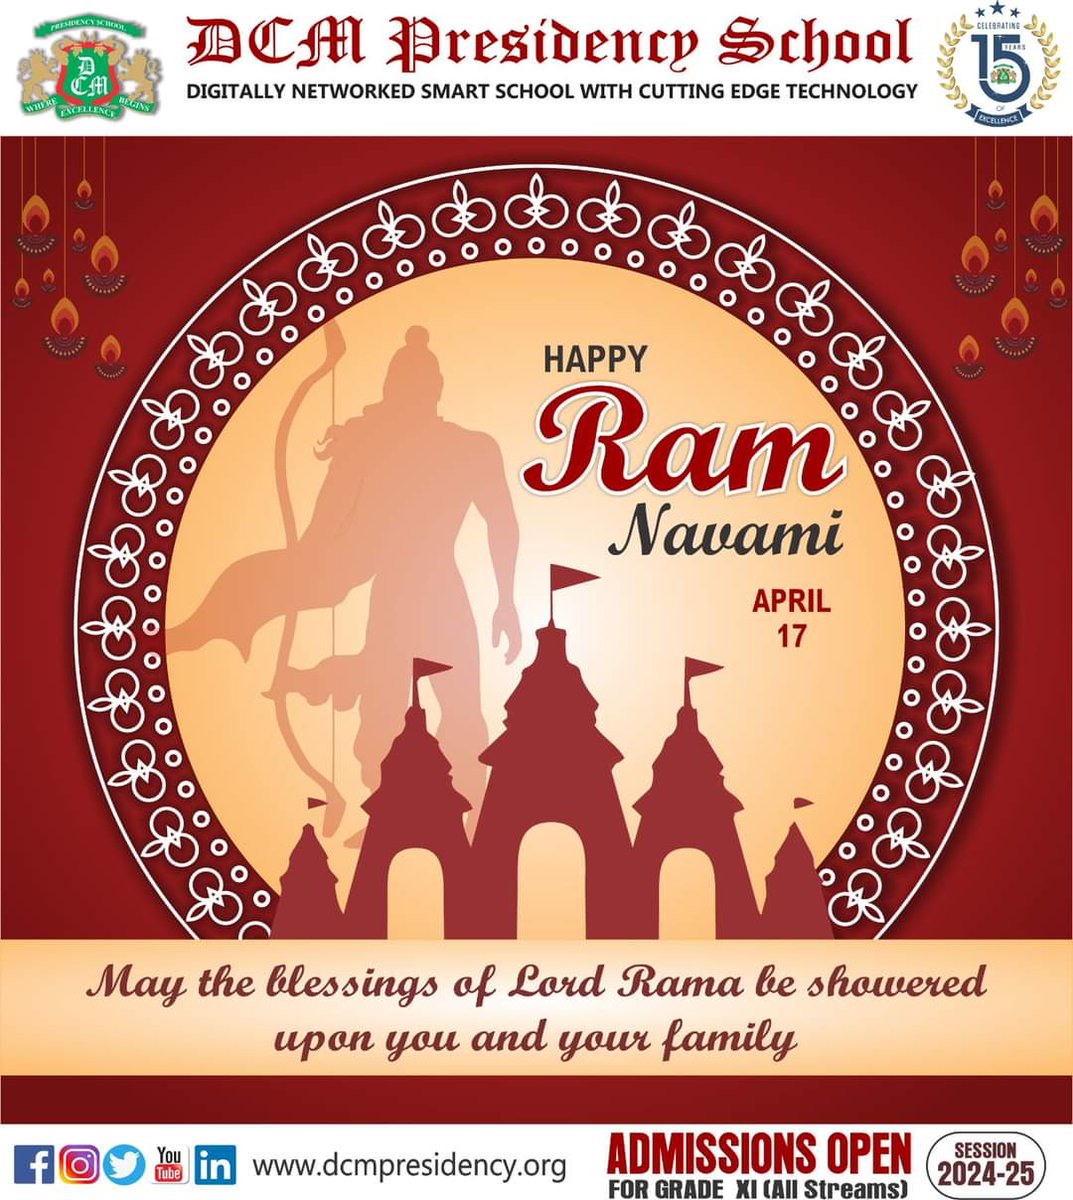 Wishing you and your family a blessed Ram Navami filled with devotion, joy, and peace. May Lord Rama guide you towards righteousness and virtue. #BestSchoolInLudhiana #DCMP #ram #RamNavami2024